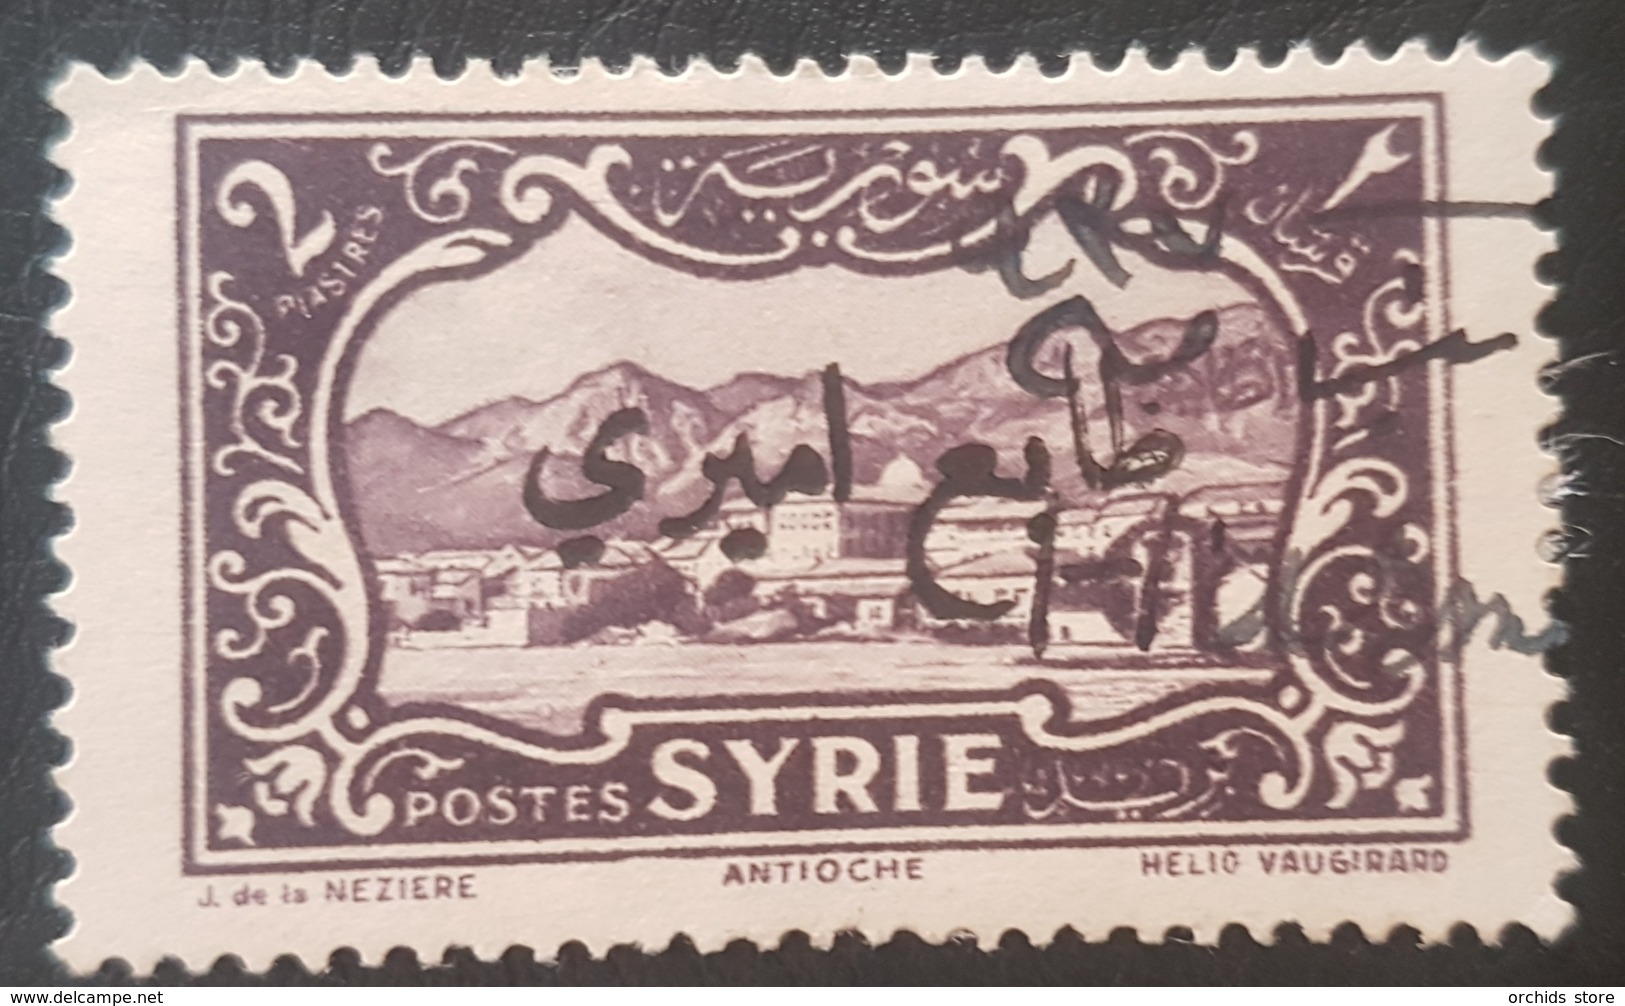 AS4 #160 - Syria 1939 Postage Stamp 2 Pi Of 1930 Overprinted Fiscal Revenue - Syria